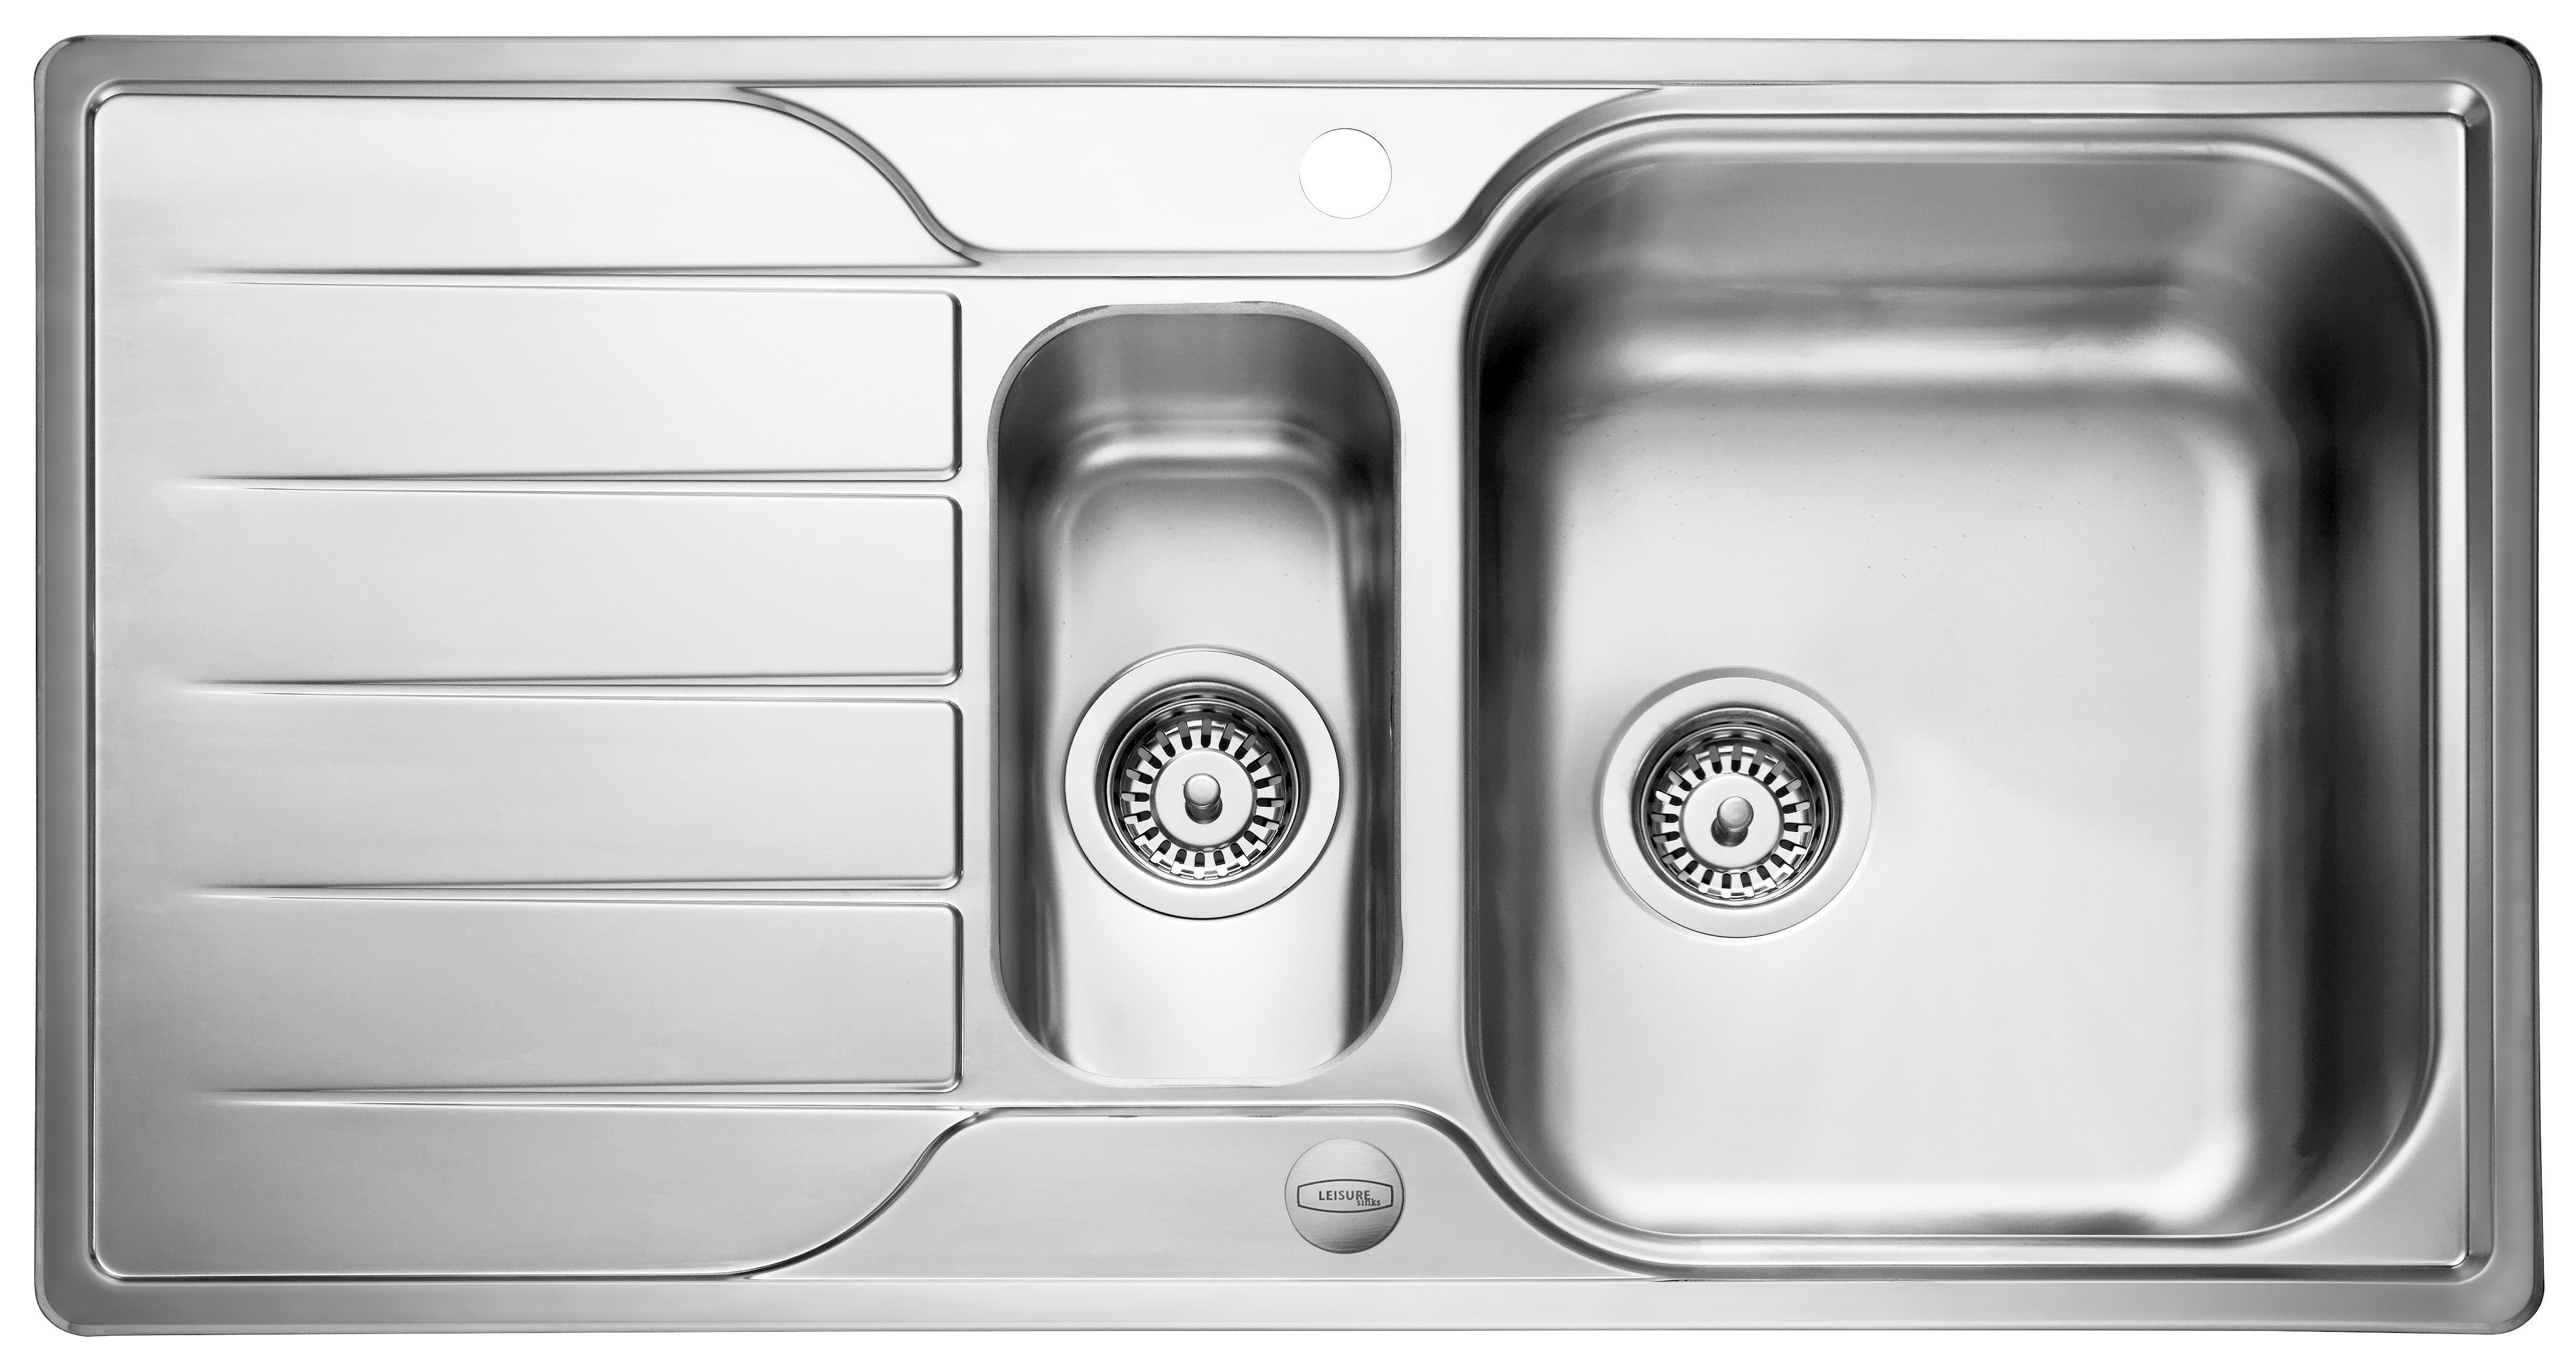 Leisure Albion 1.5 Bowl Reversible Kitchen Sink - Stainless Steel